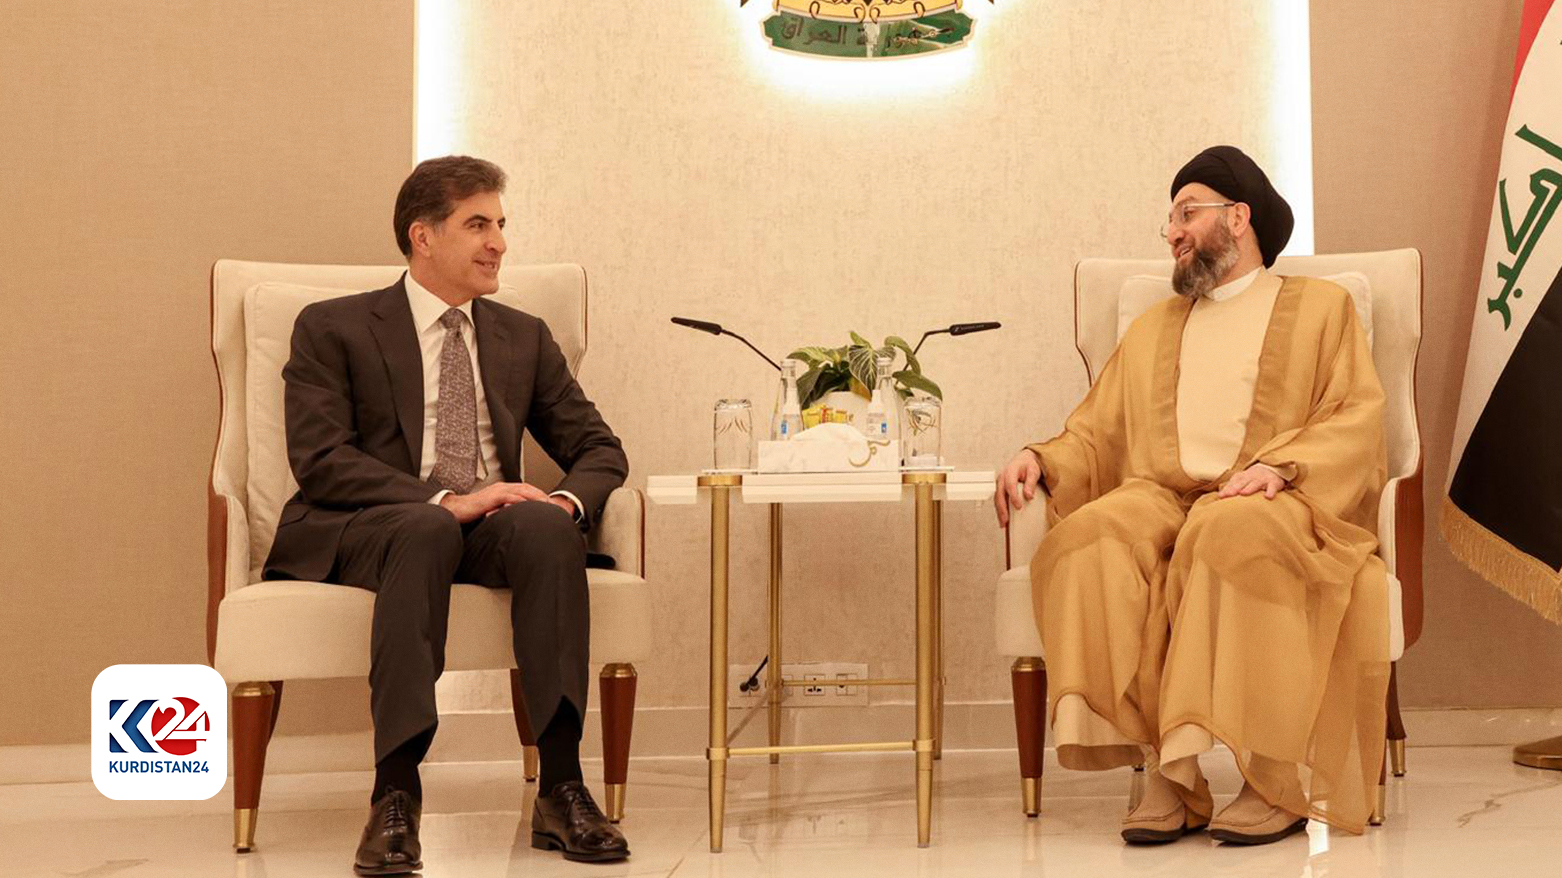 KRG President meets with Ammar alHakim in Baghdad